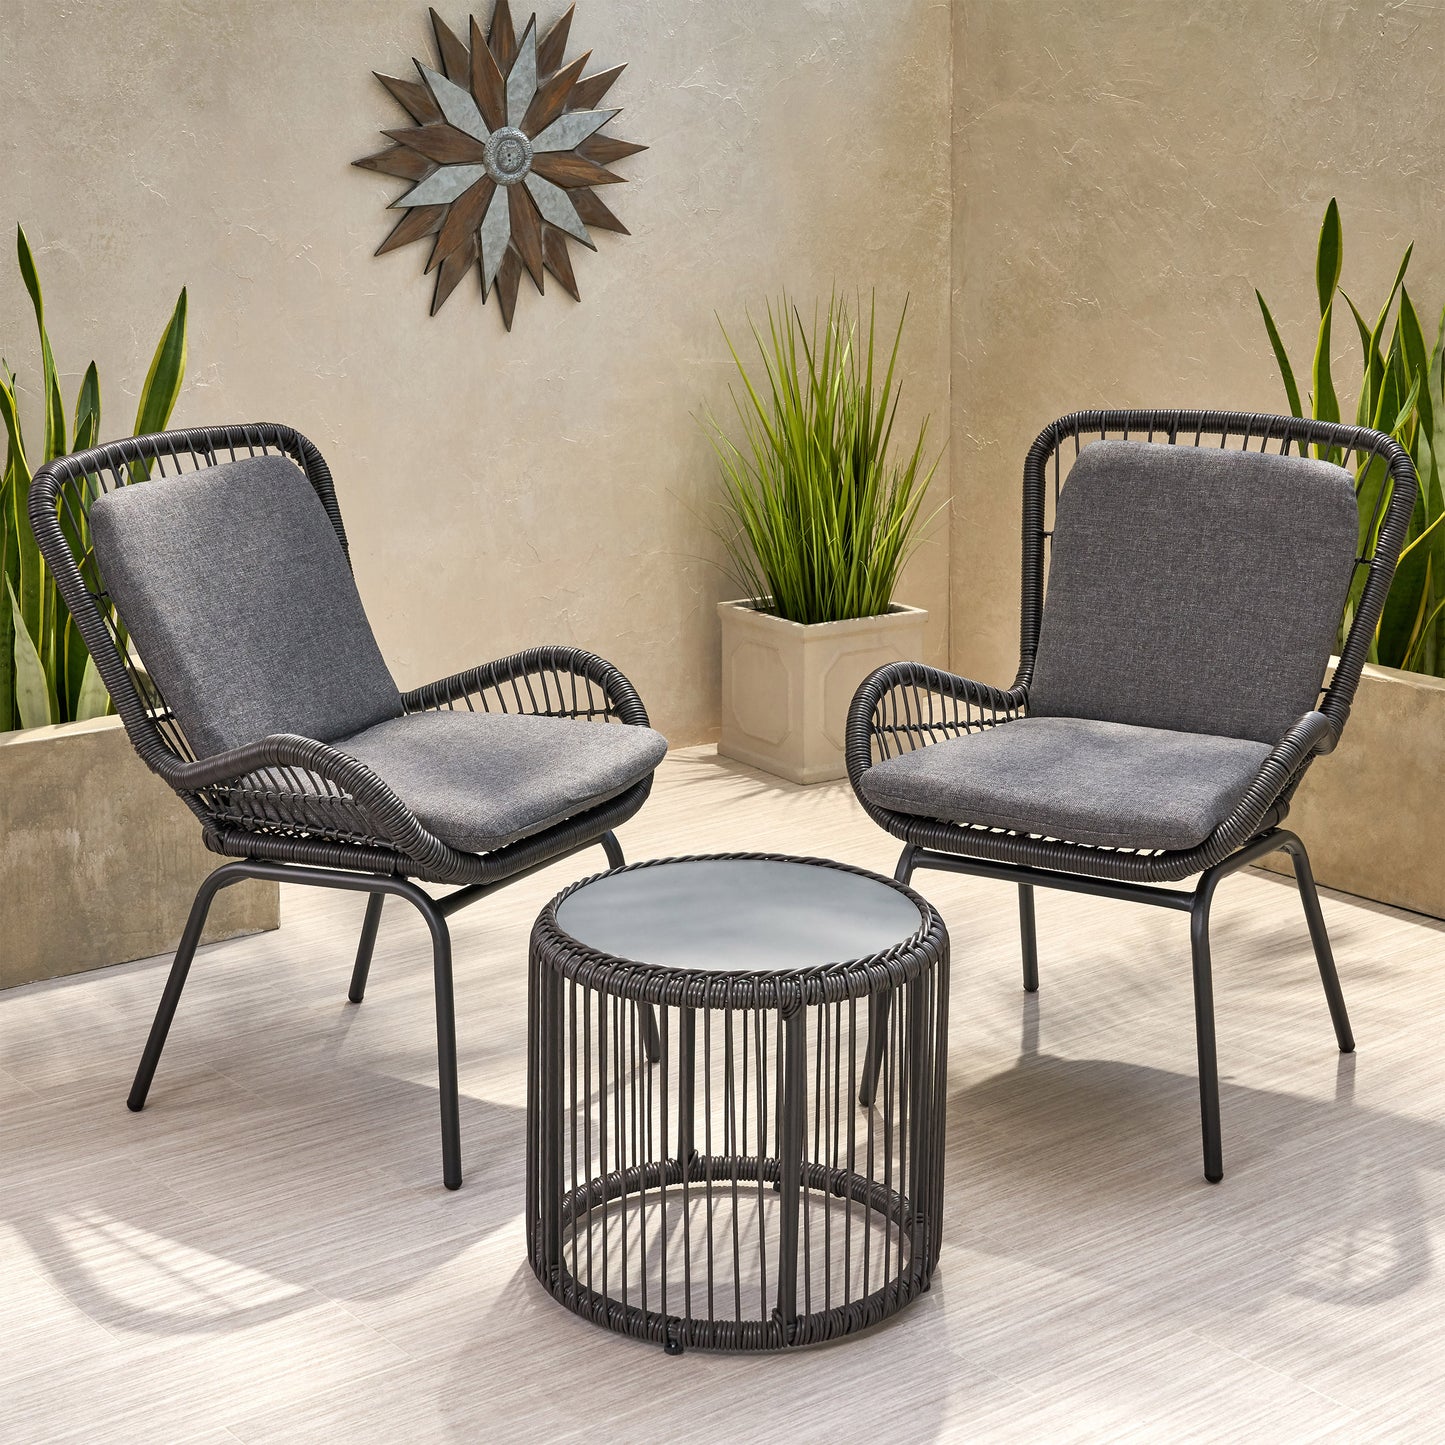 Averyrose Outdoor Wicker Chat Set with Cushions